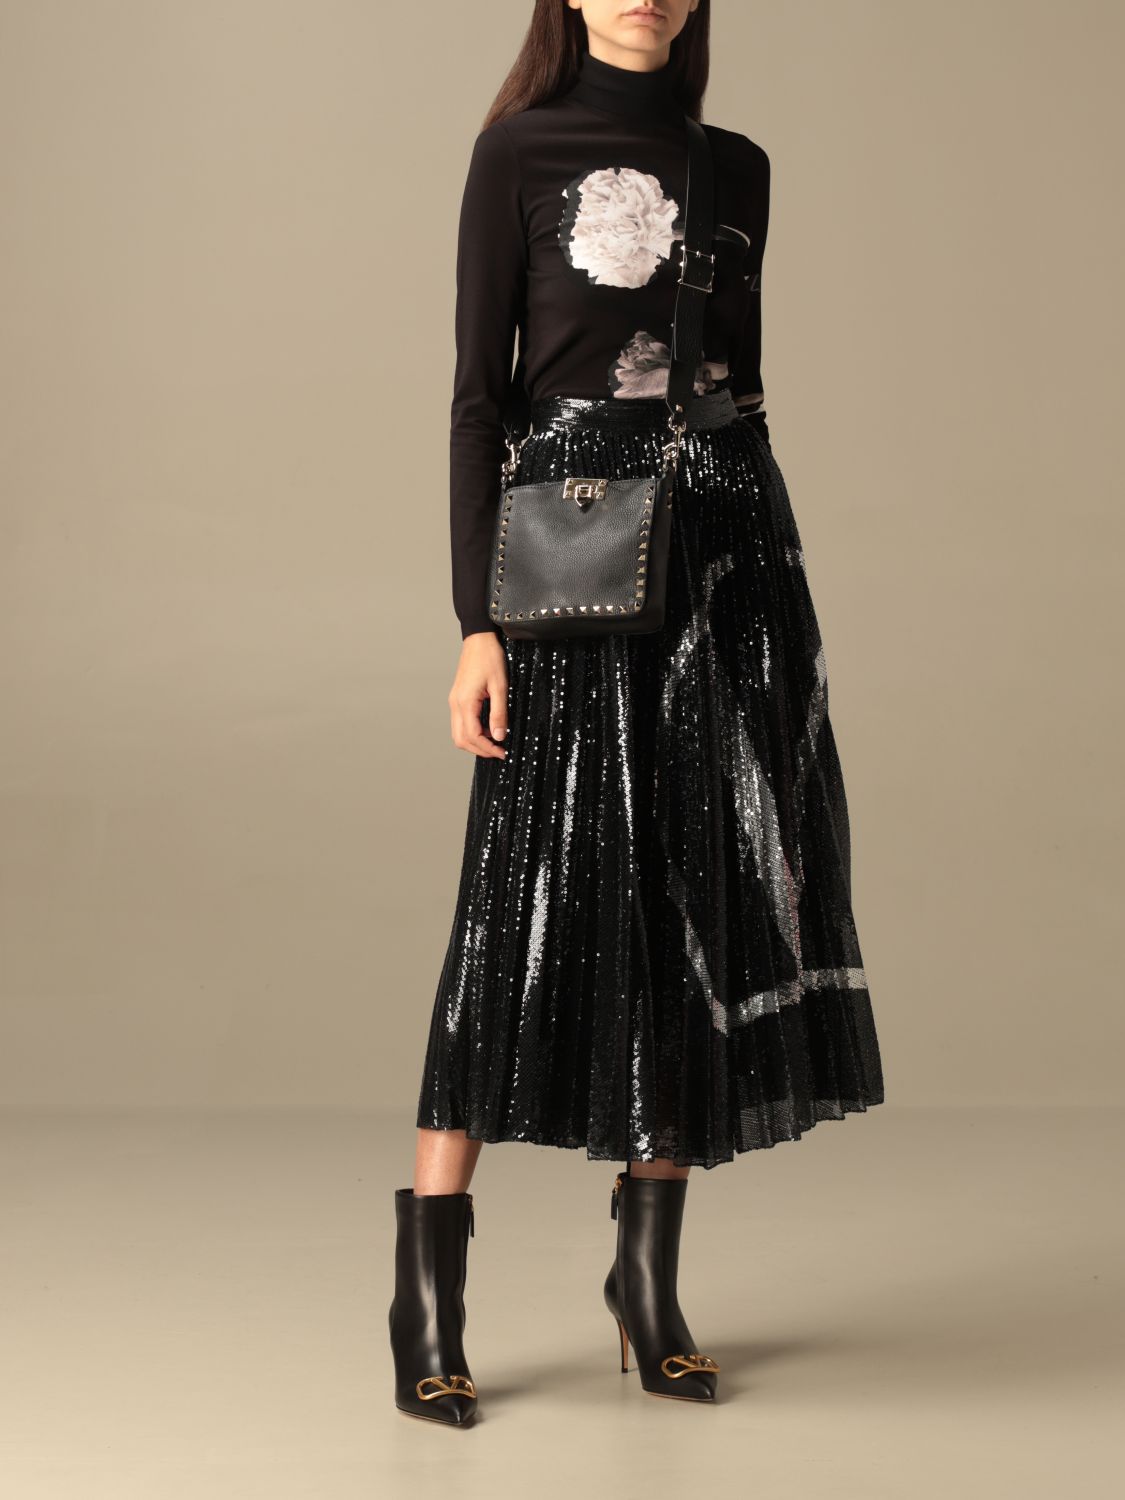 Valentino skirt in pleated sequin fabric